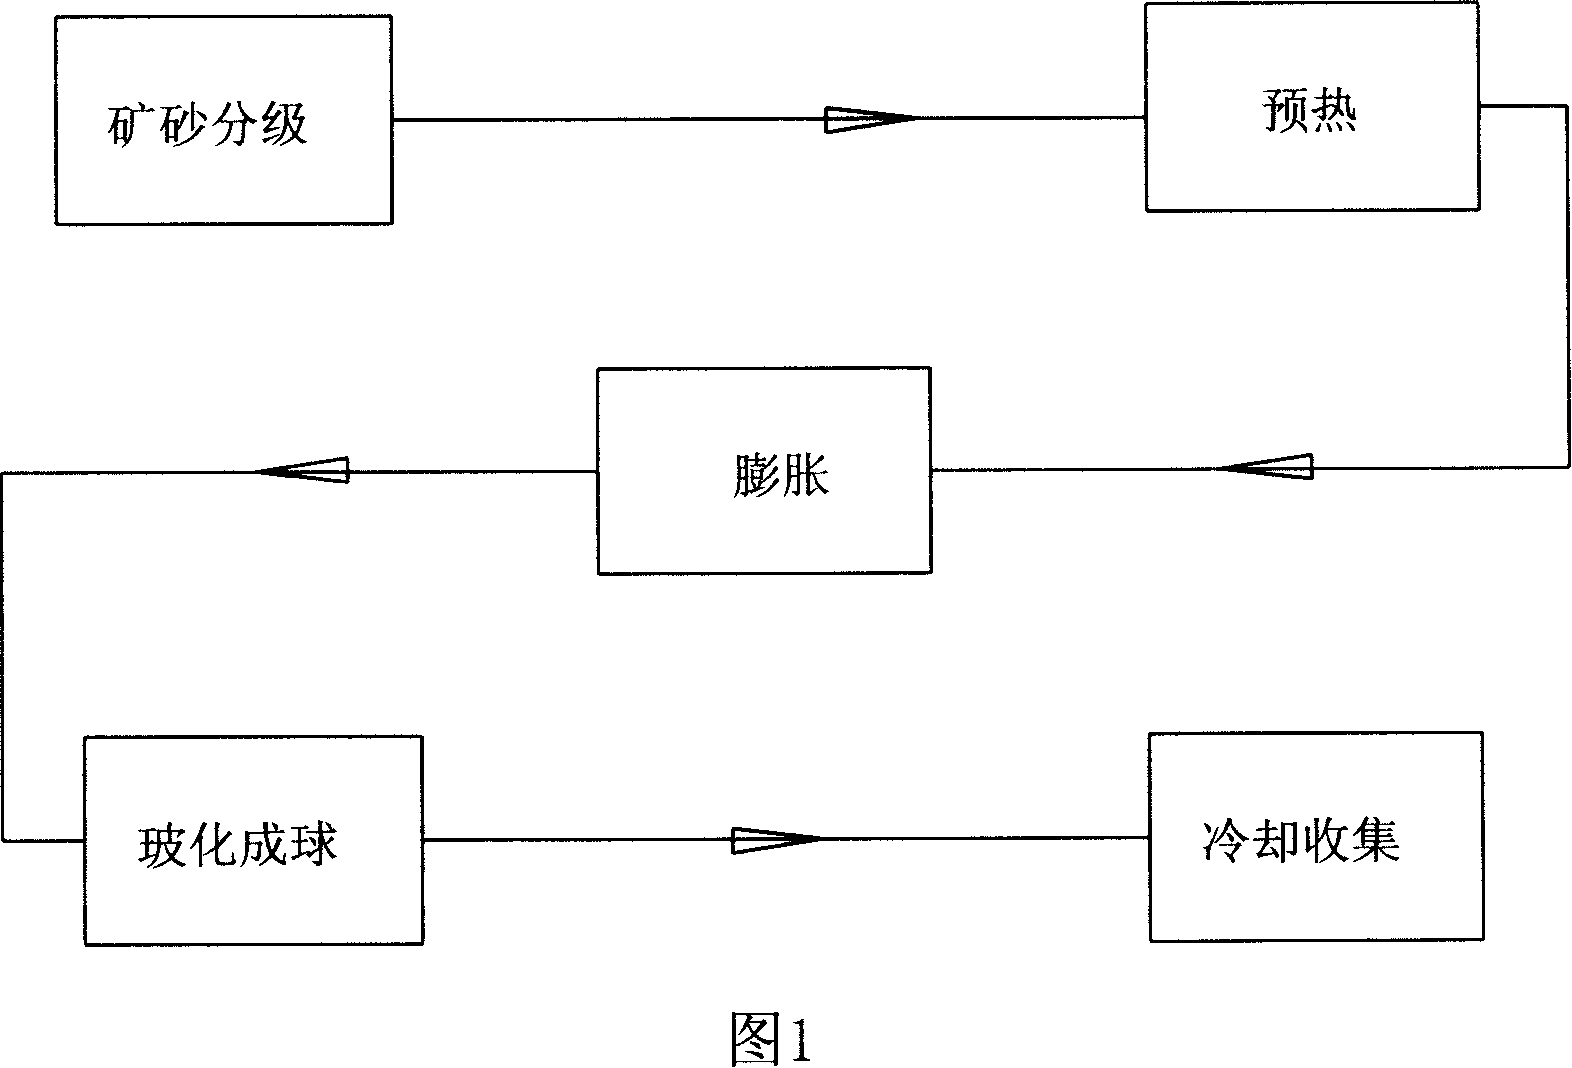 Process for making dilation vitrified microbead and rotary floating dilation vitrification furnace